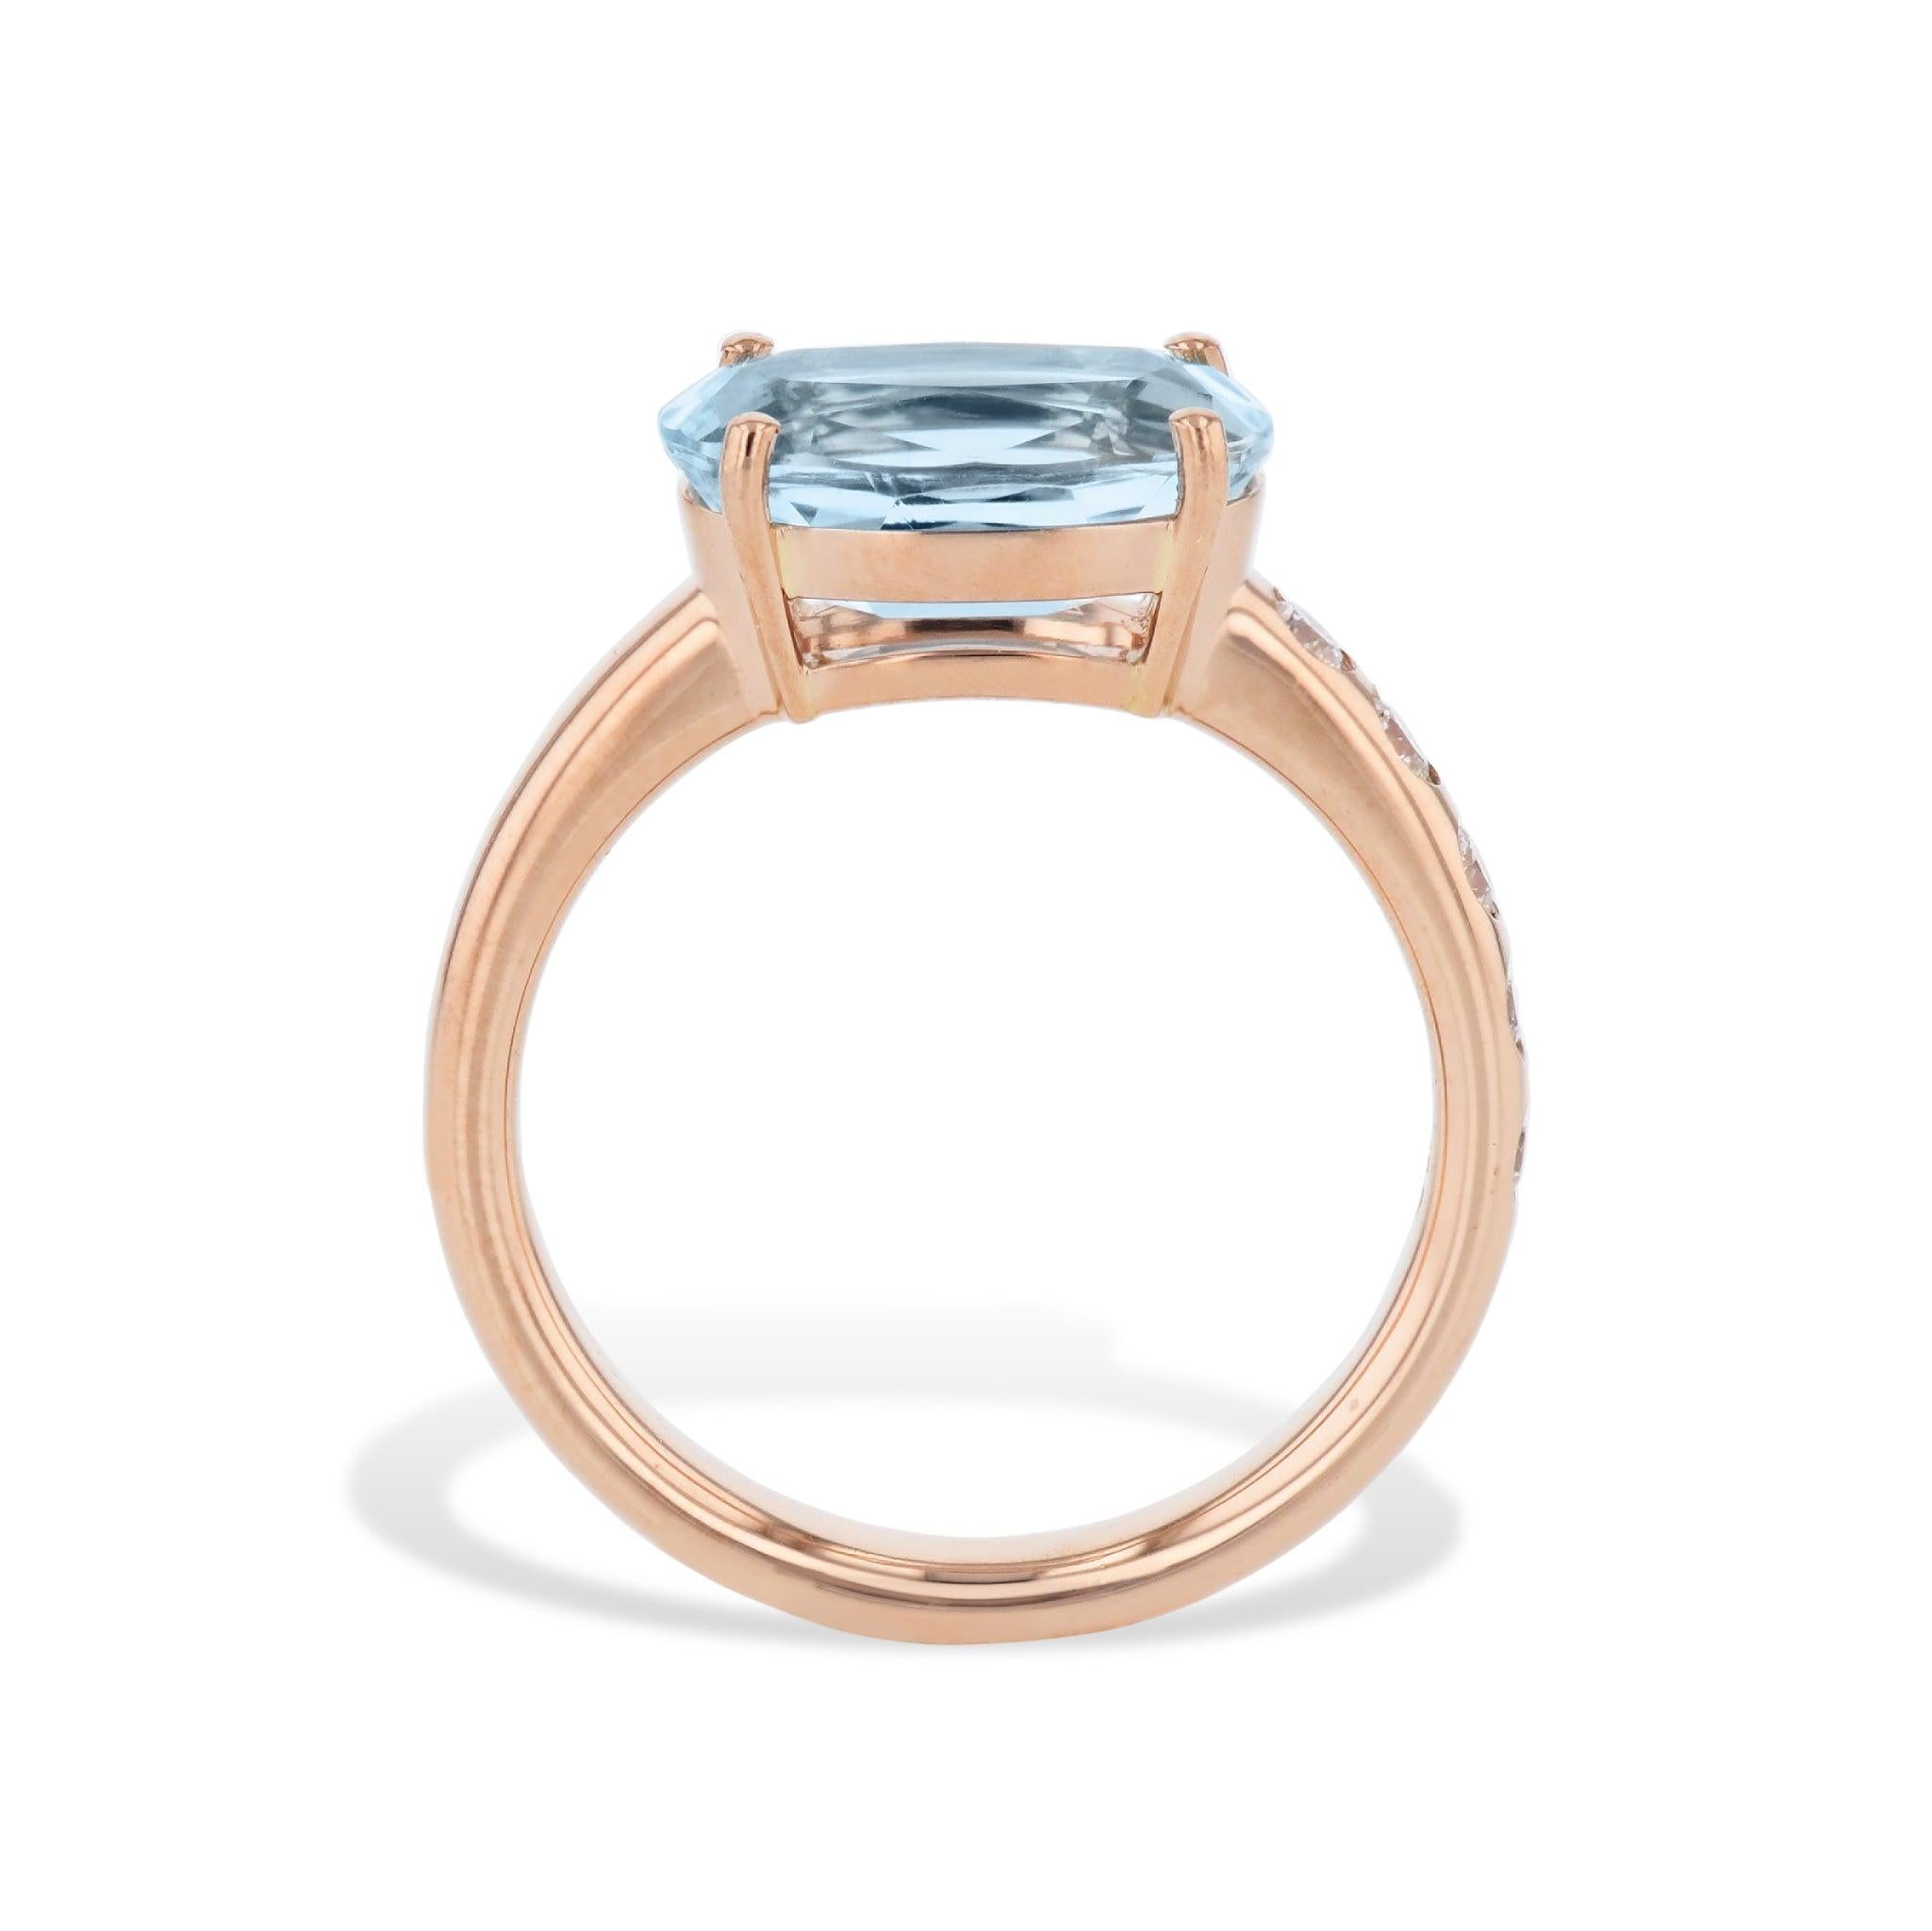 Celebrate your unique style with this handmade Oval cut Aquamarine Diamond Rose Gold Ring from the HH Collection! This stunning statement piece features an Oval cut Aquamarine, set east/west on a four-prong basket, and five diamond burnishes set on